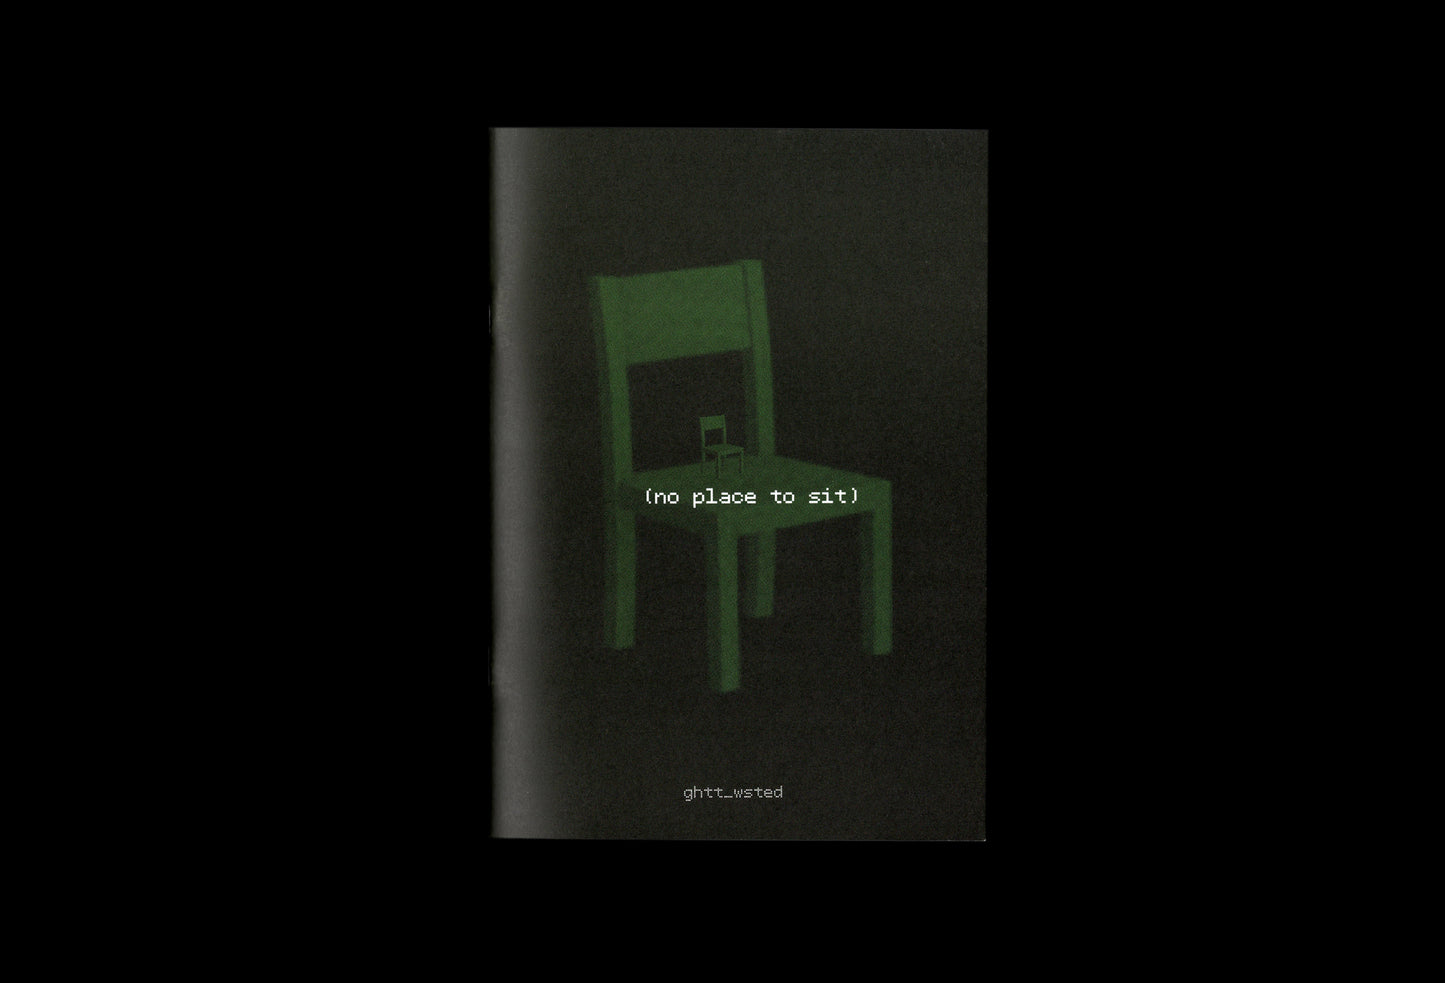 ghtt_wsted "(no place to sit)" Zine